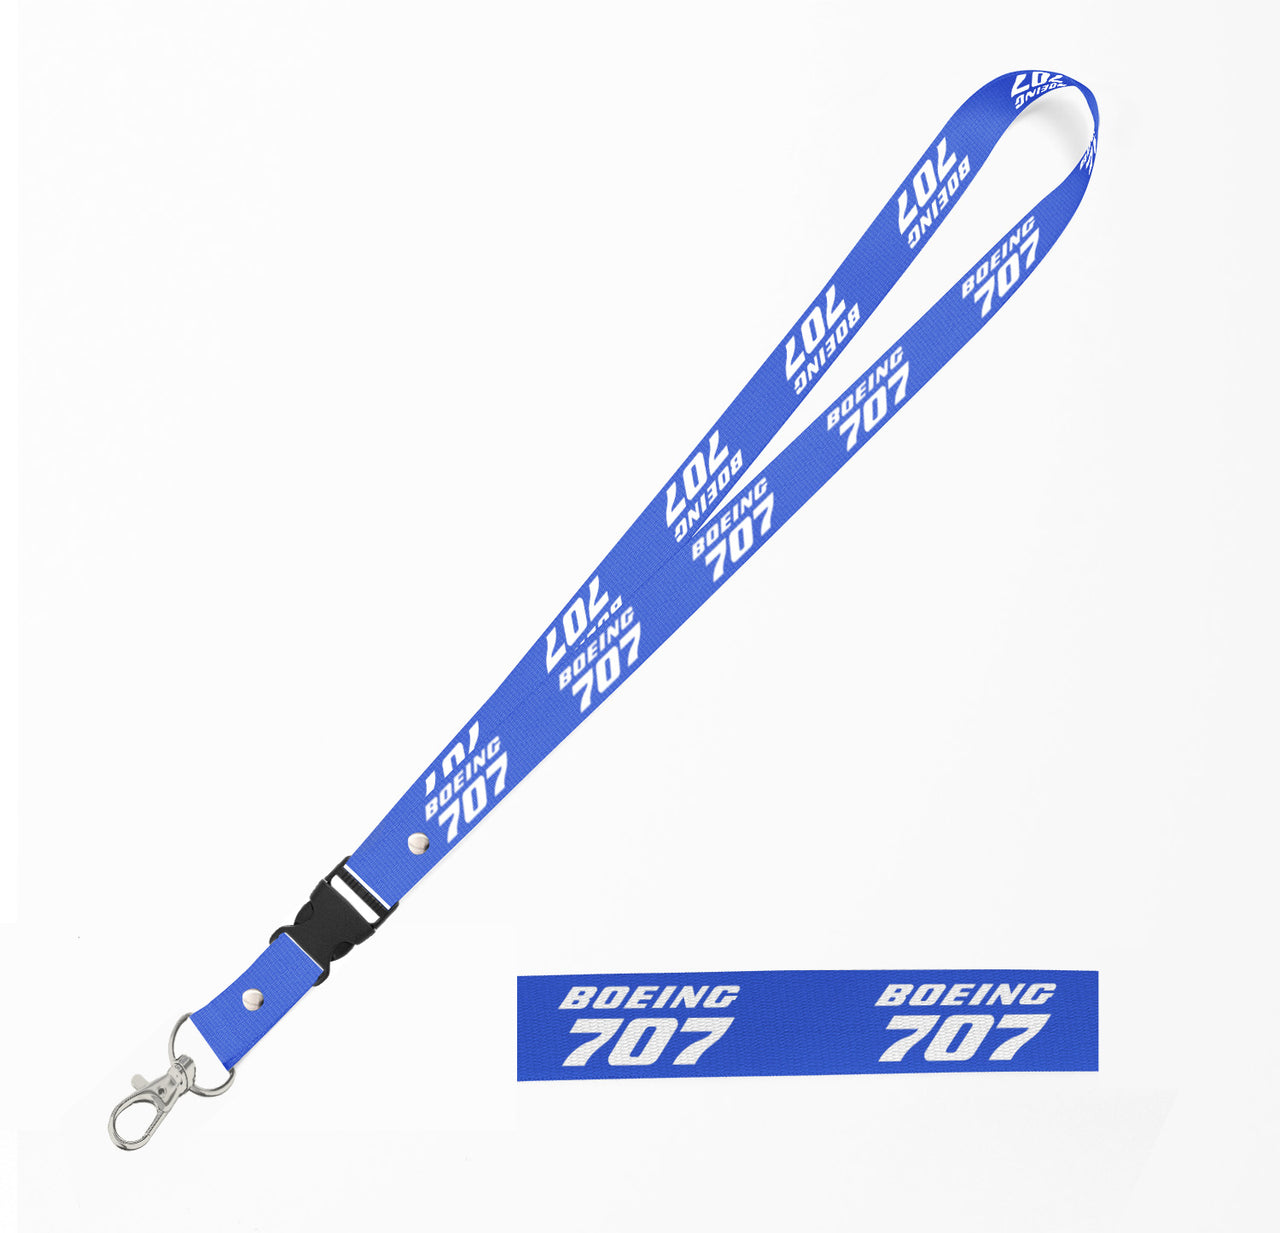 Boeing 707 & Text Designed Detachable Lanyard & ID Holders